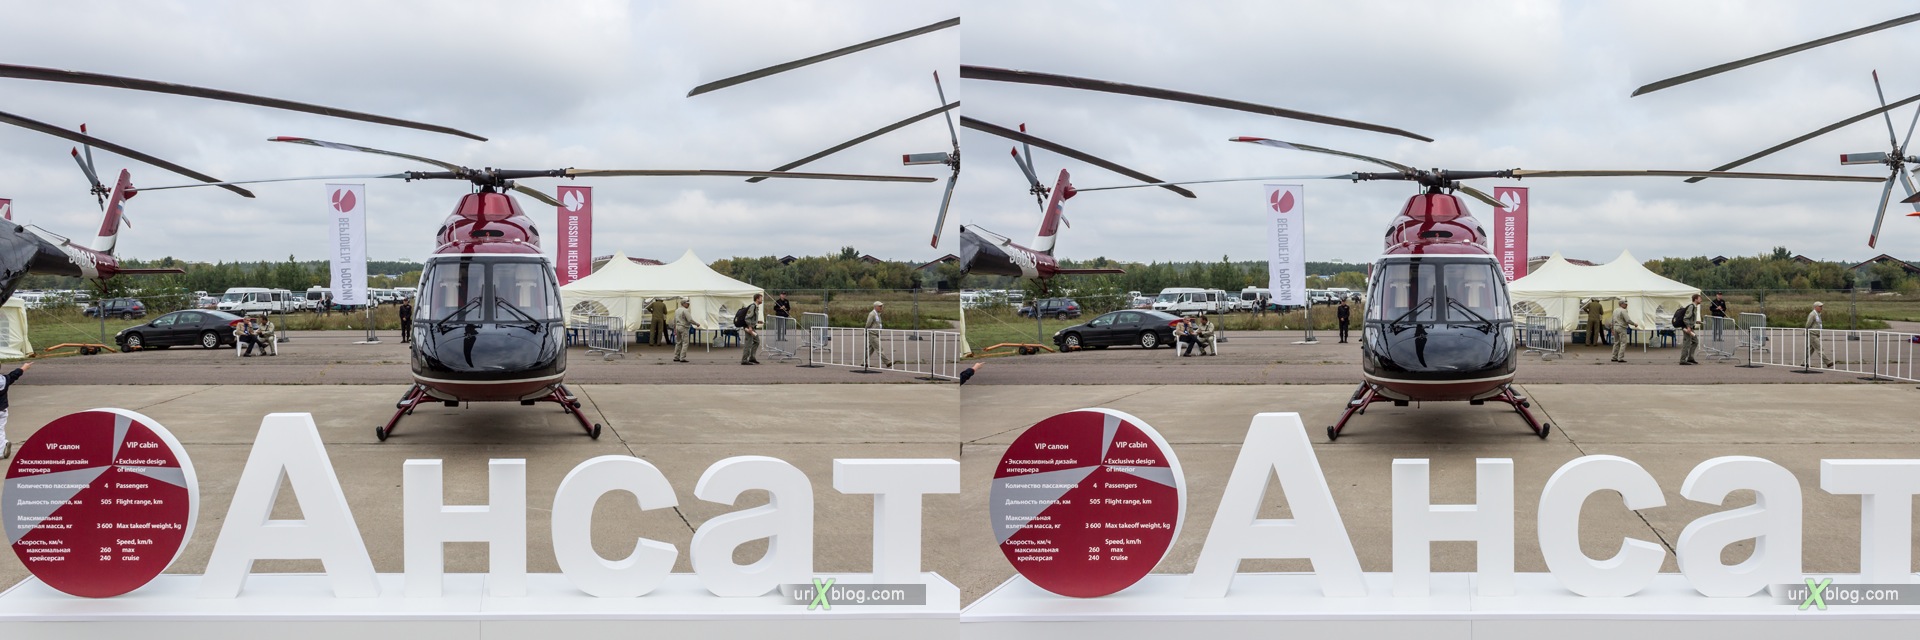 2013, MAKS, International Aviation and Space Salon, Russia, Ramenskoye airfield, Ansat, helicopter, 3D, stereo pair, cross-eyed, crossview, cross view stereo pair, stereoscopic